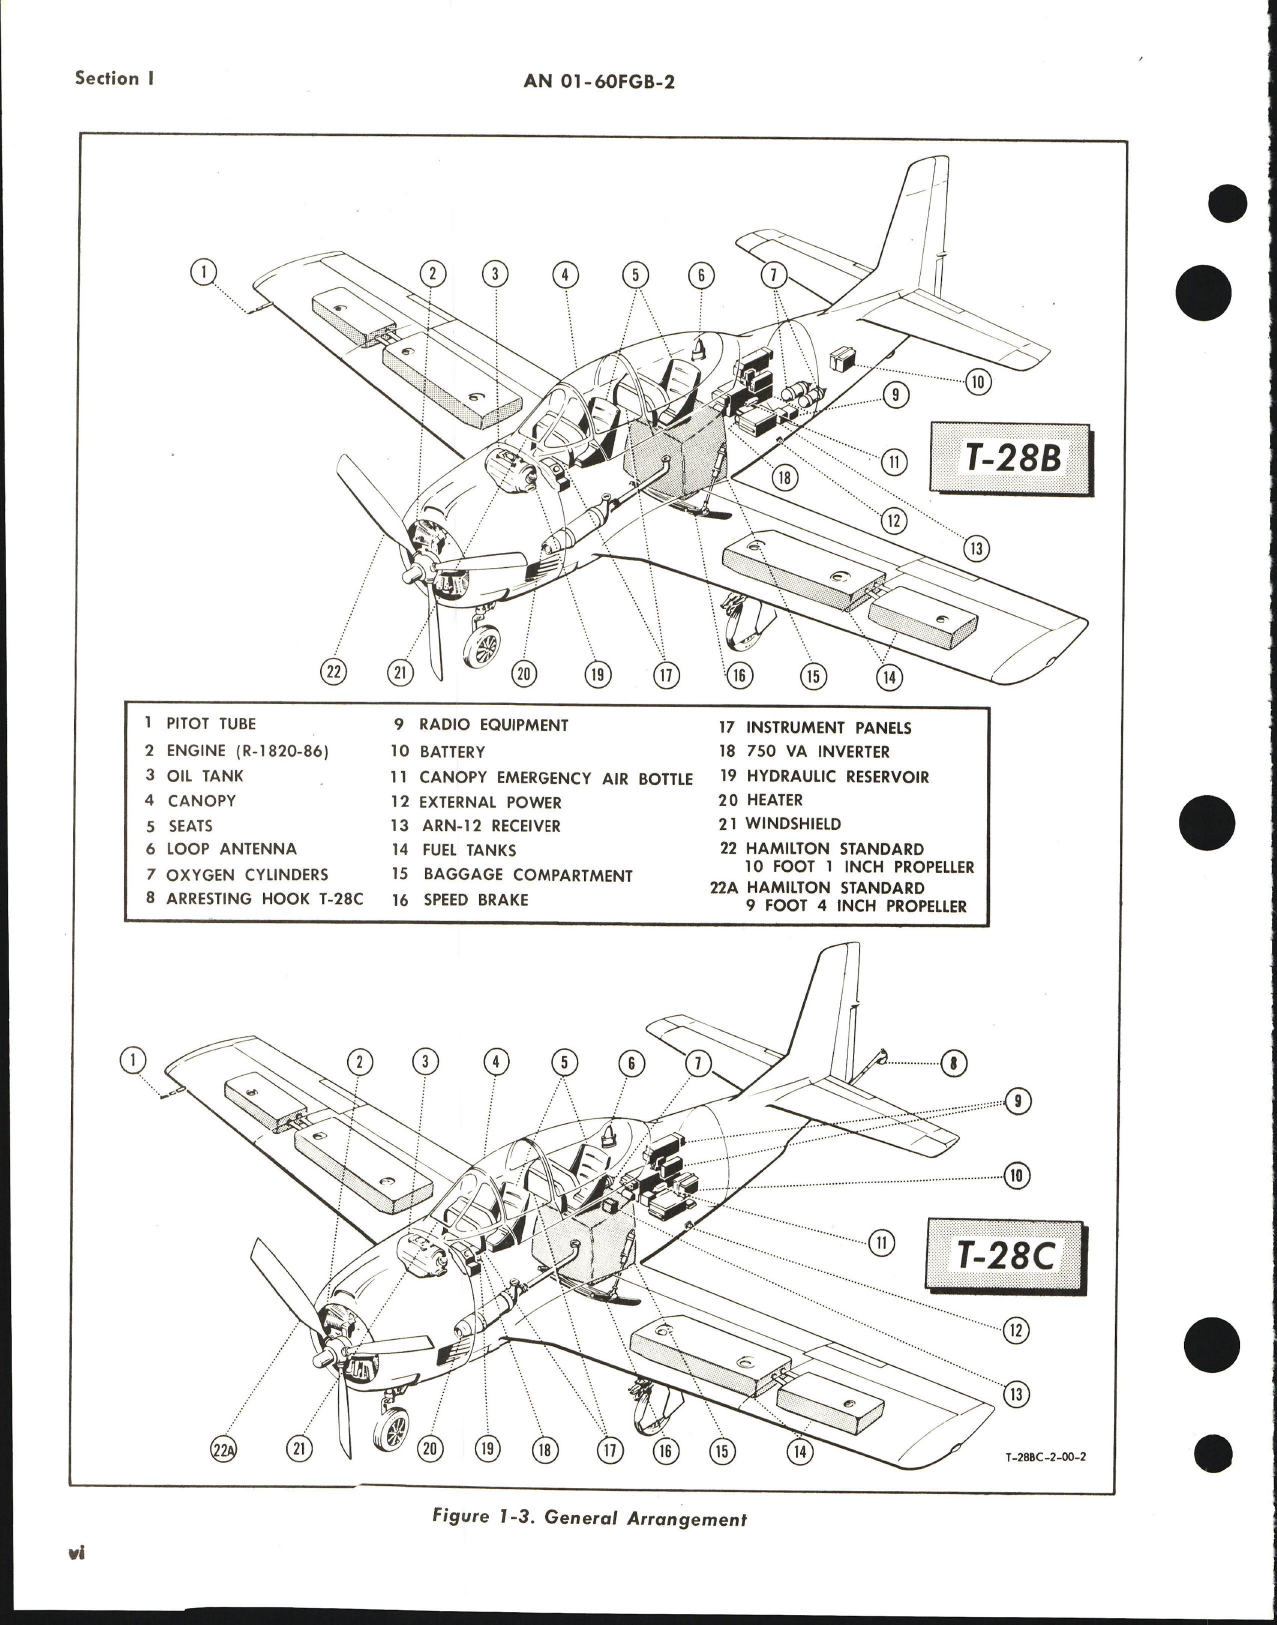 Sample page 8 from AirCorps Library document: Maintenance Instructions for T-28B and T-28C